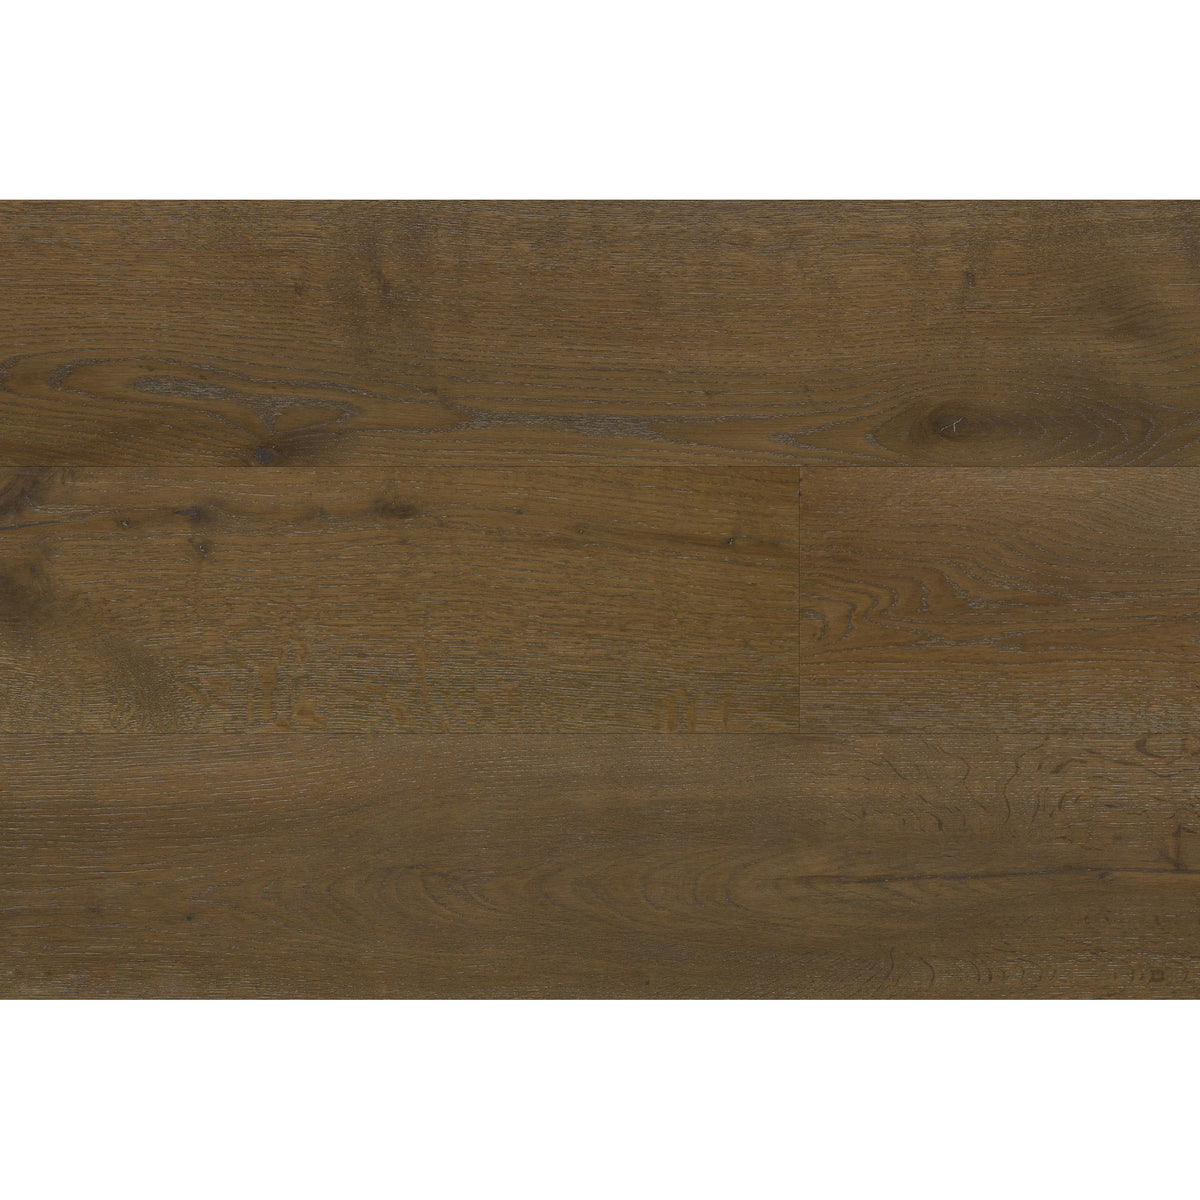 Naturally Aged Flooring - Pinnacle Collection - Spire